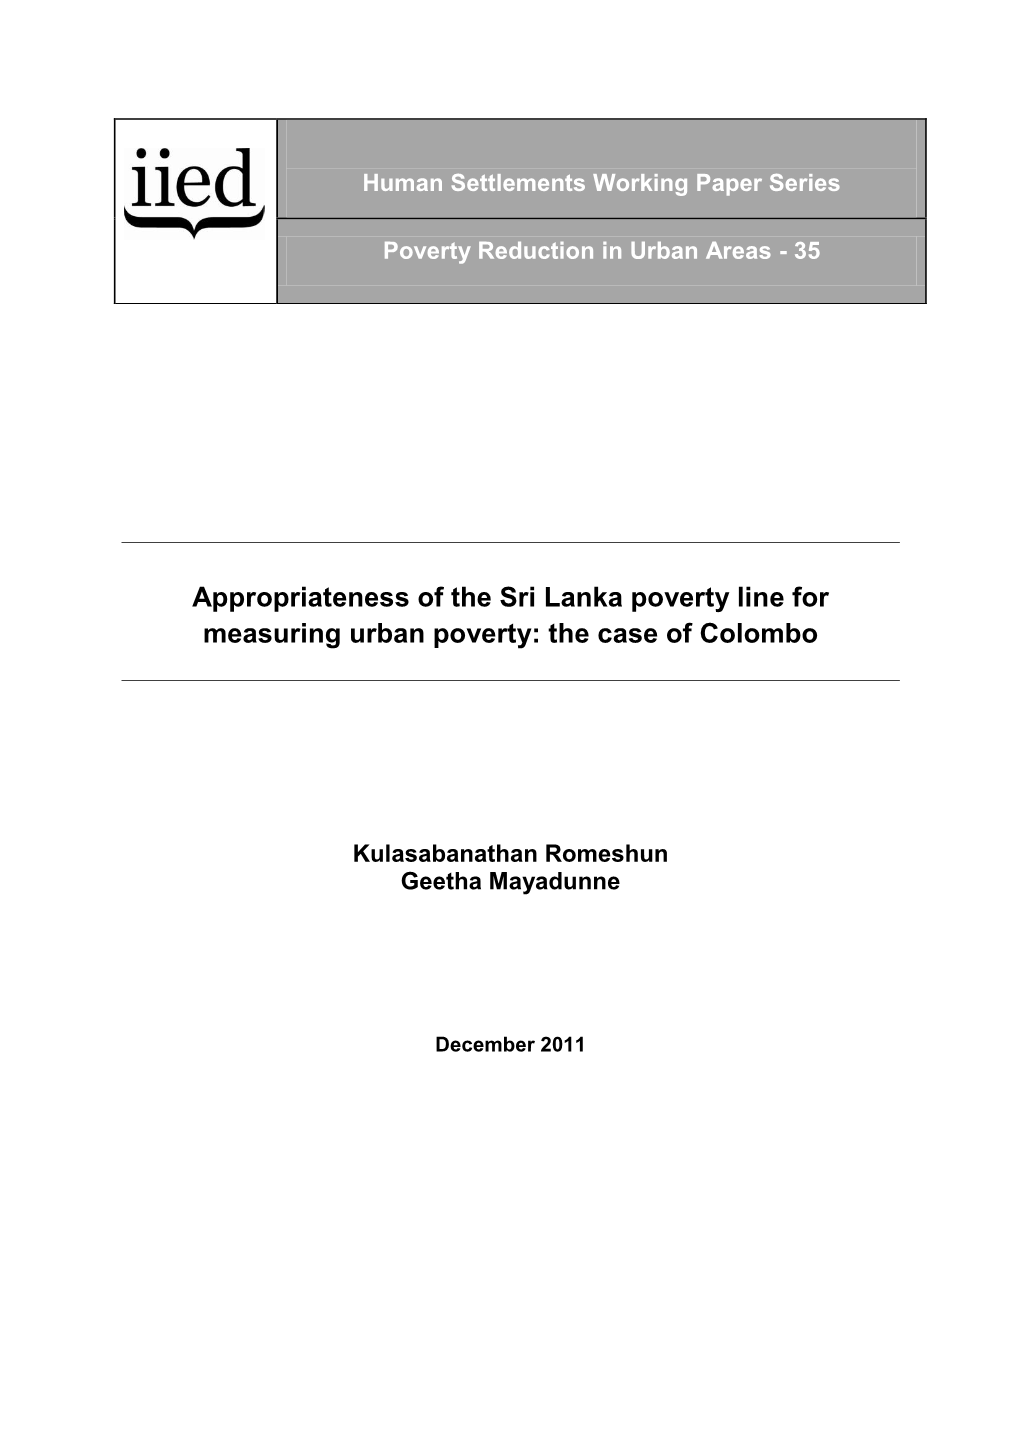 Appropriateness of the Sri Lanka Poverty Line for Measuring Urban Poverty: the Case of Colombo